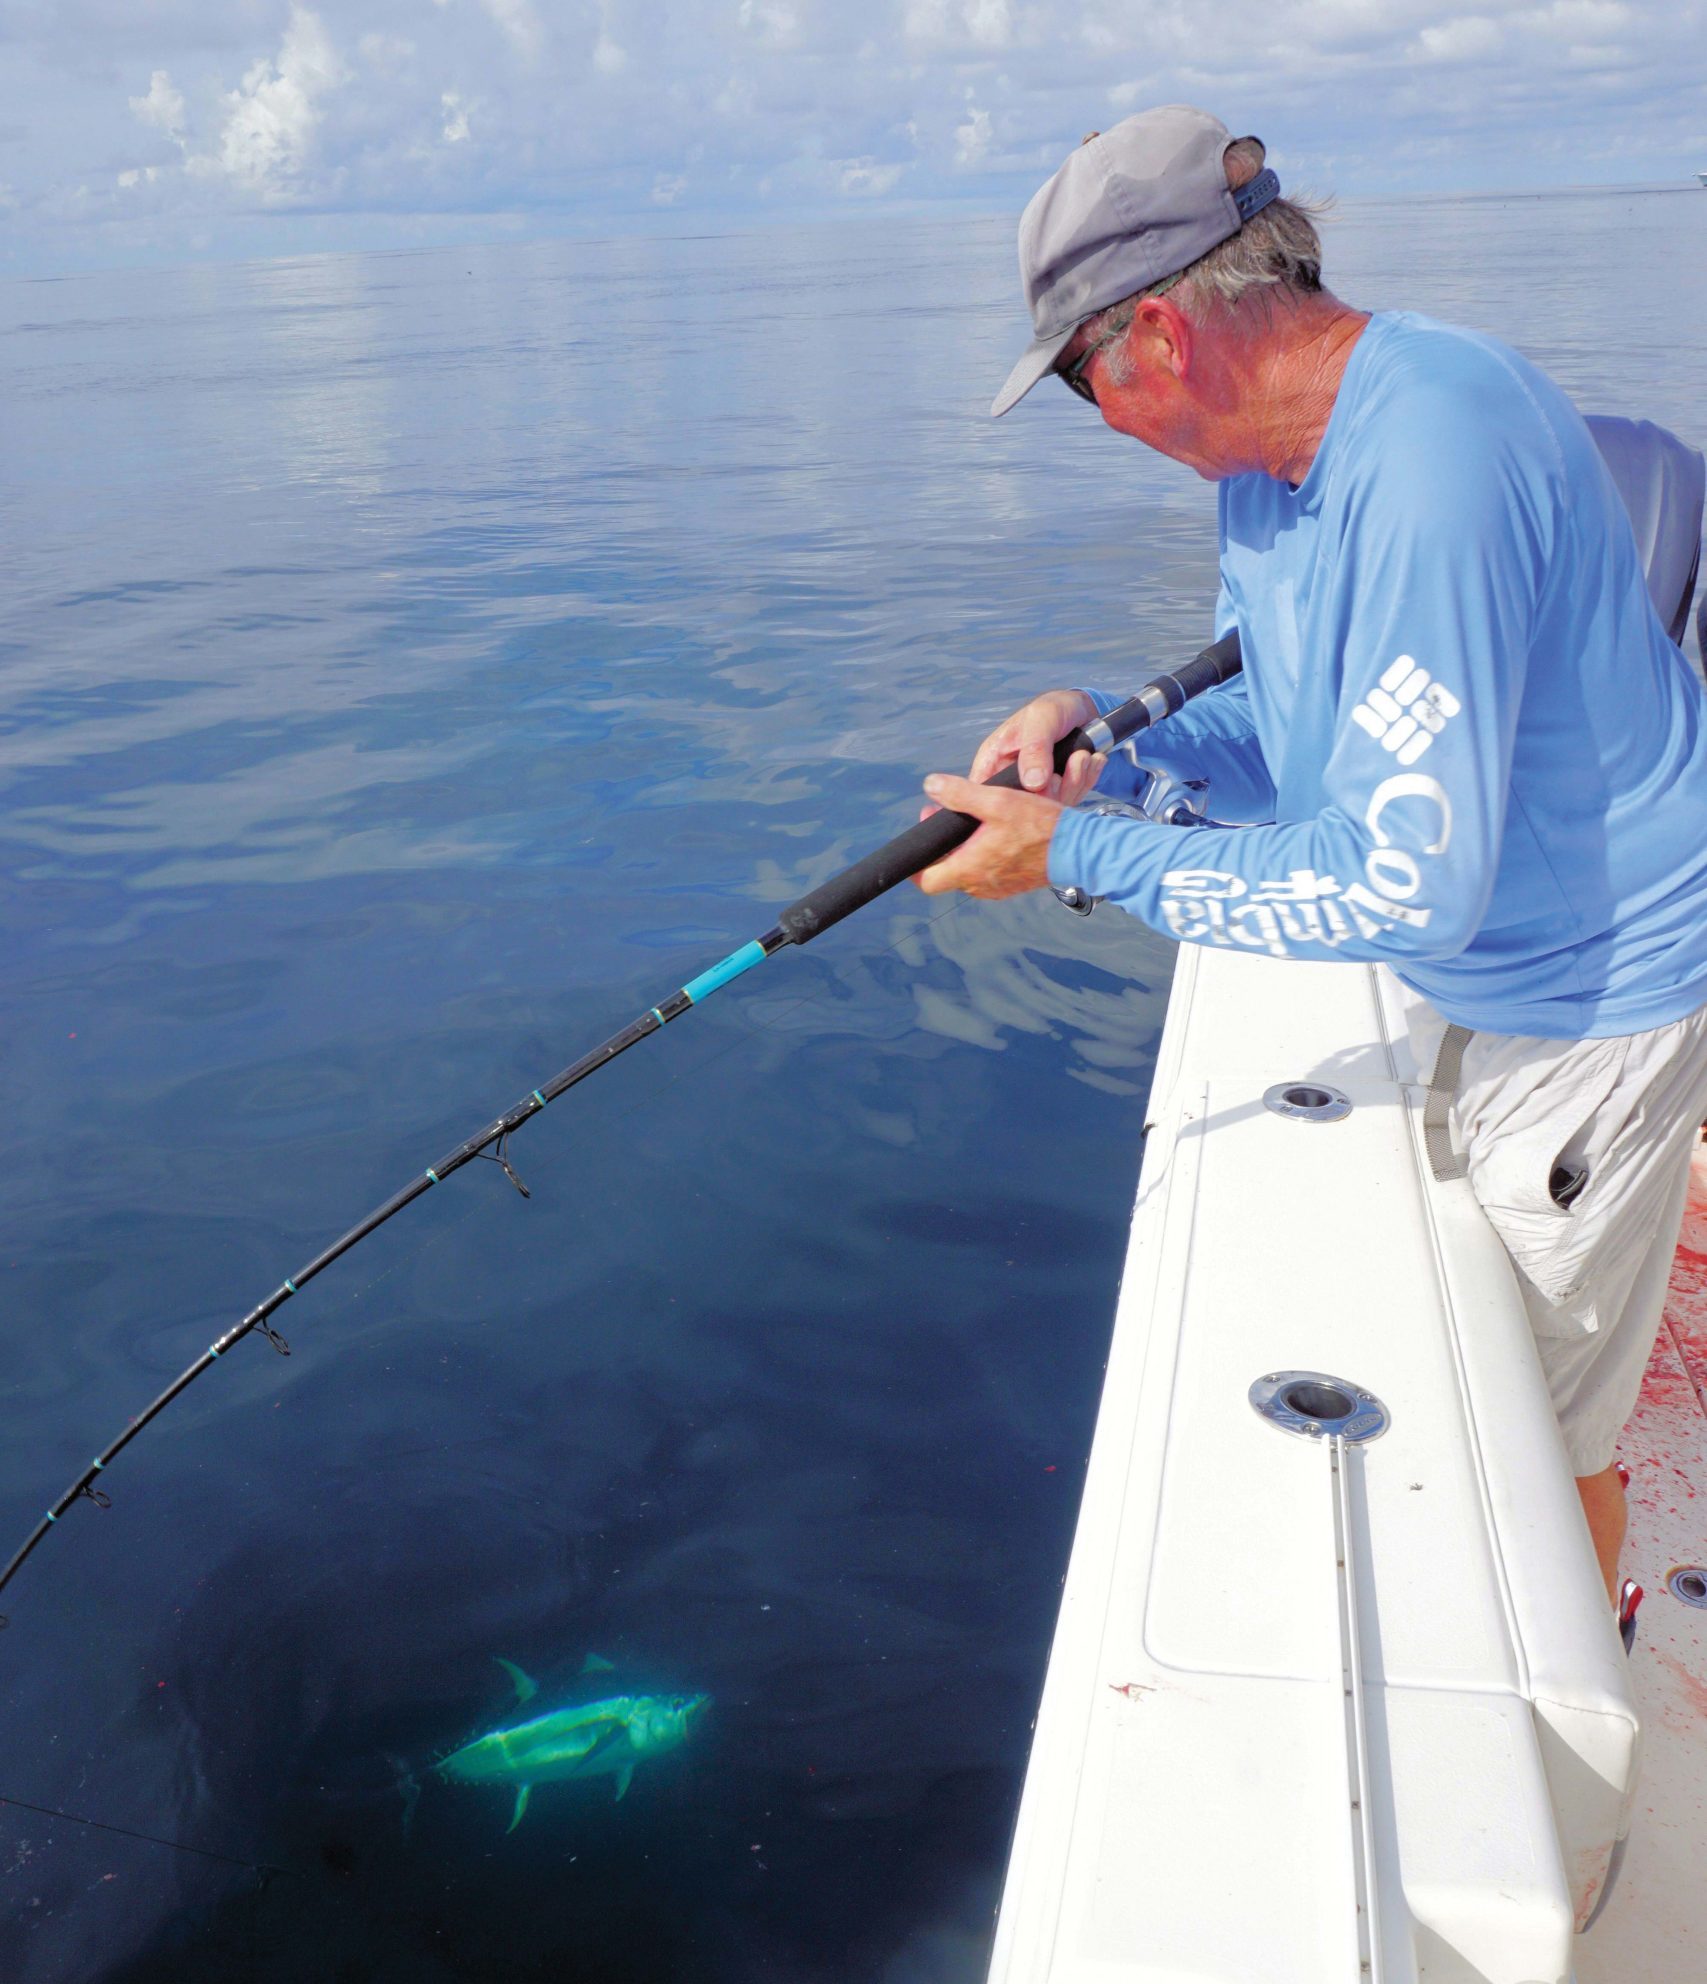 Old Guys Can Catch Big Fish: If They (We) Change Tactics! - The